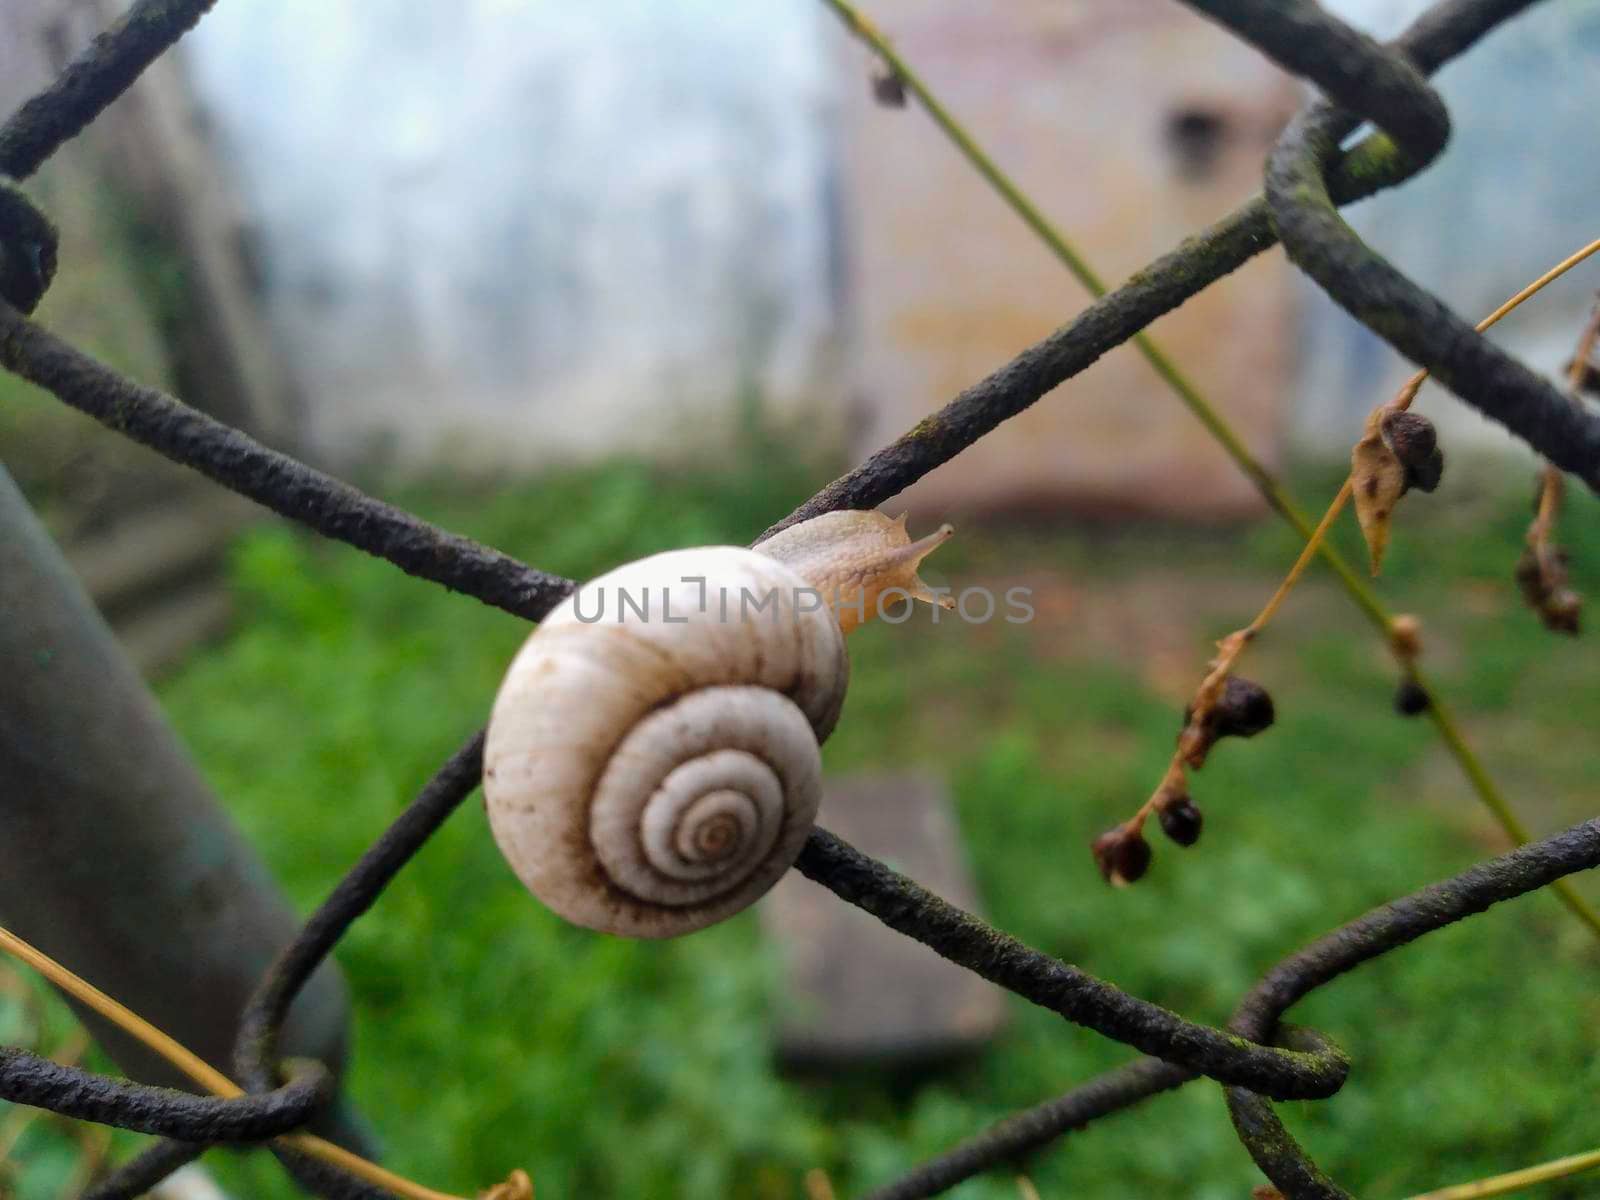 Shot of a white Grape snail Helix pomatia crawling on the tree trunk by milastokerpro